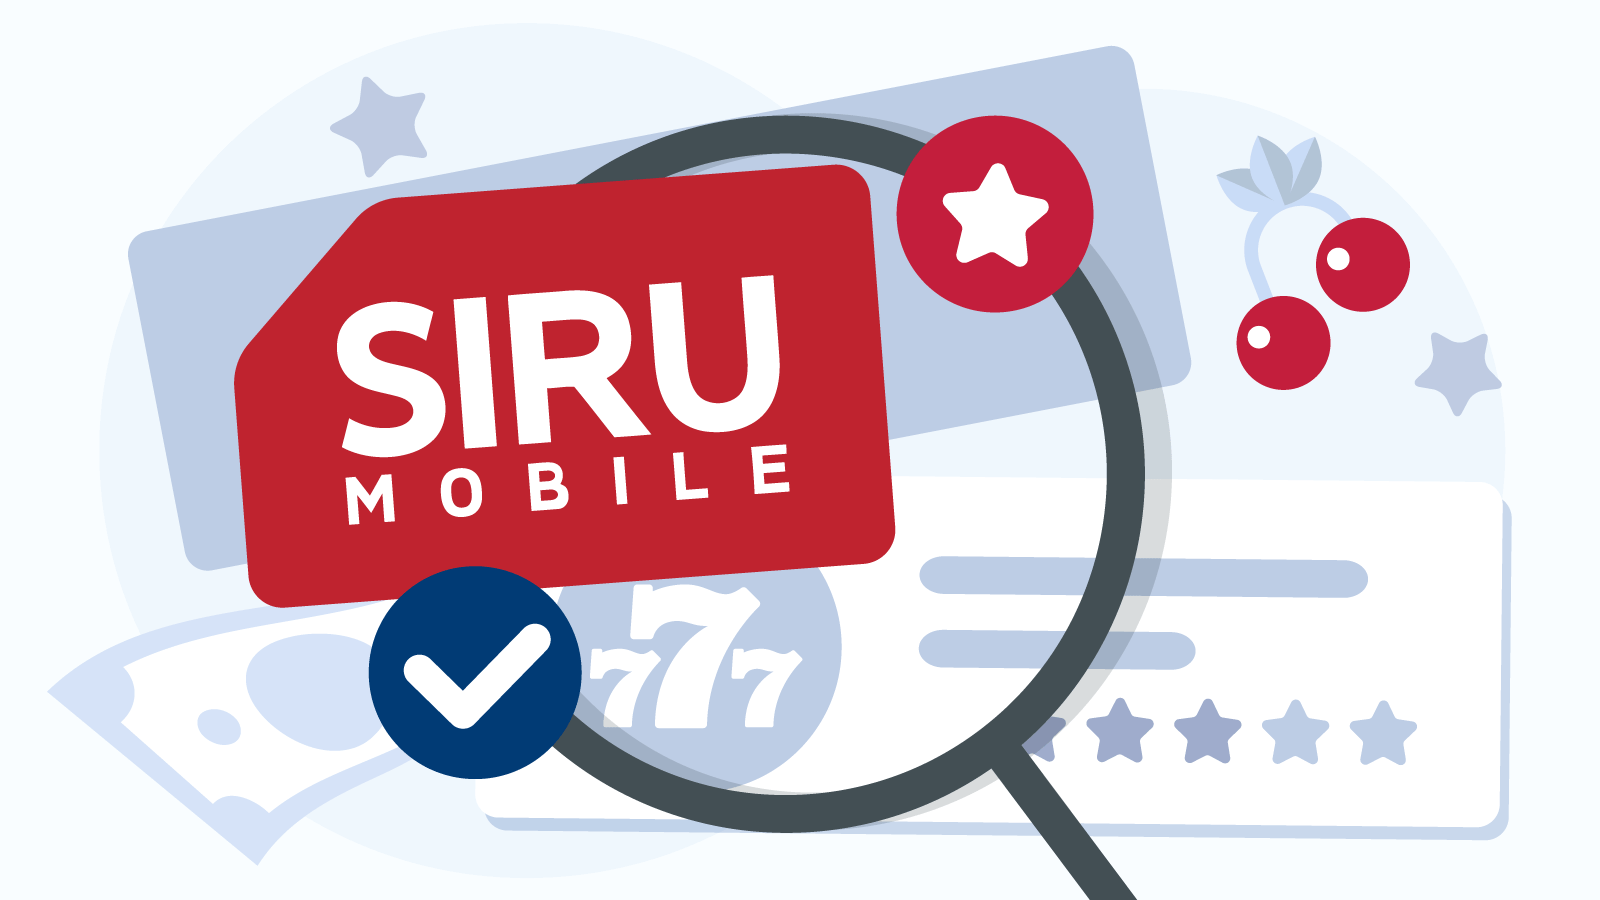 How We Select Online Casinos with Siru Mobile